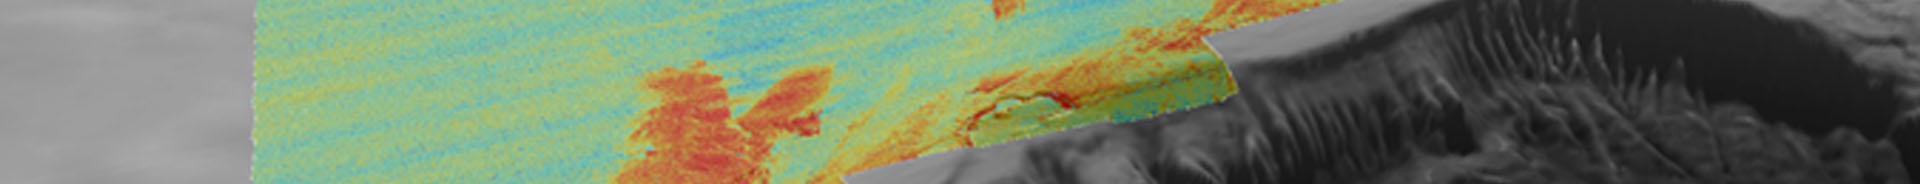 Innovative Technology and Partnership Leads to New EEZ Mapping